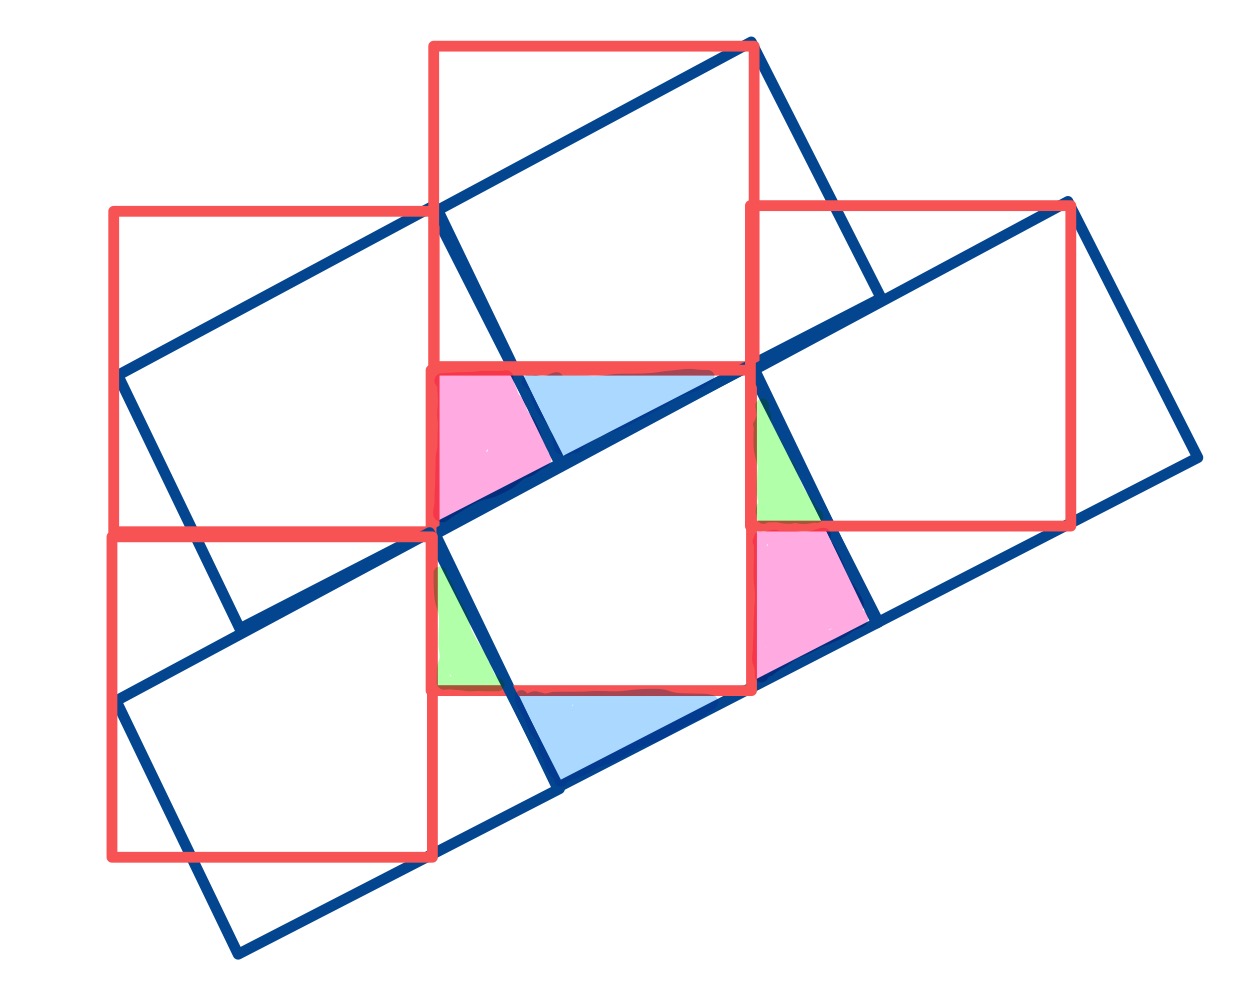 Three overlapping rectangles tessellation a